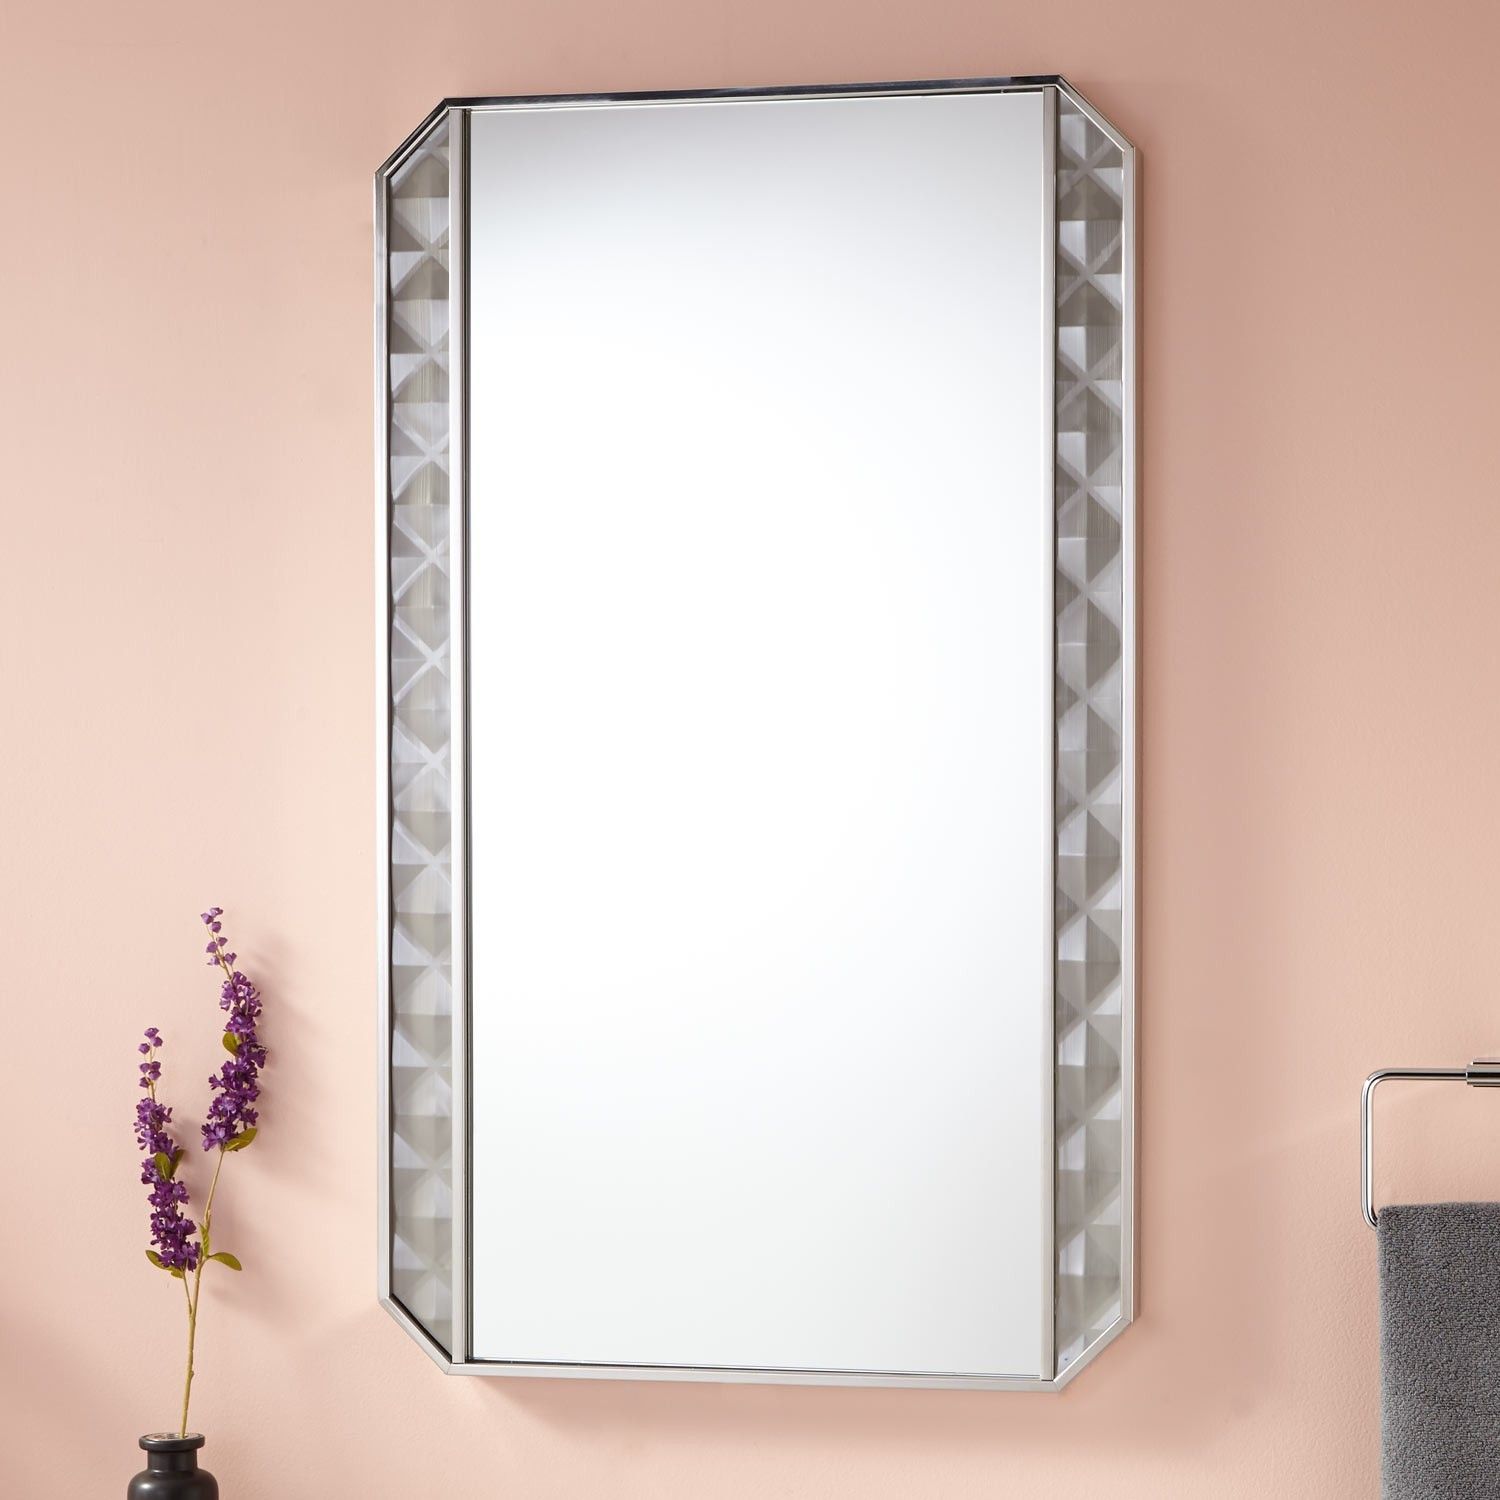 24"+mayola+stainless+steel+mirror+ +brushed | Stainless Steel Bathroom Pertaining To Drake Brushed Steel Wall Mirrors (View 5 of 15)